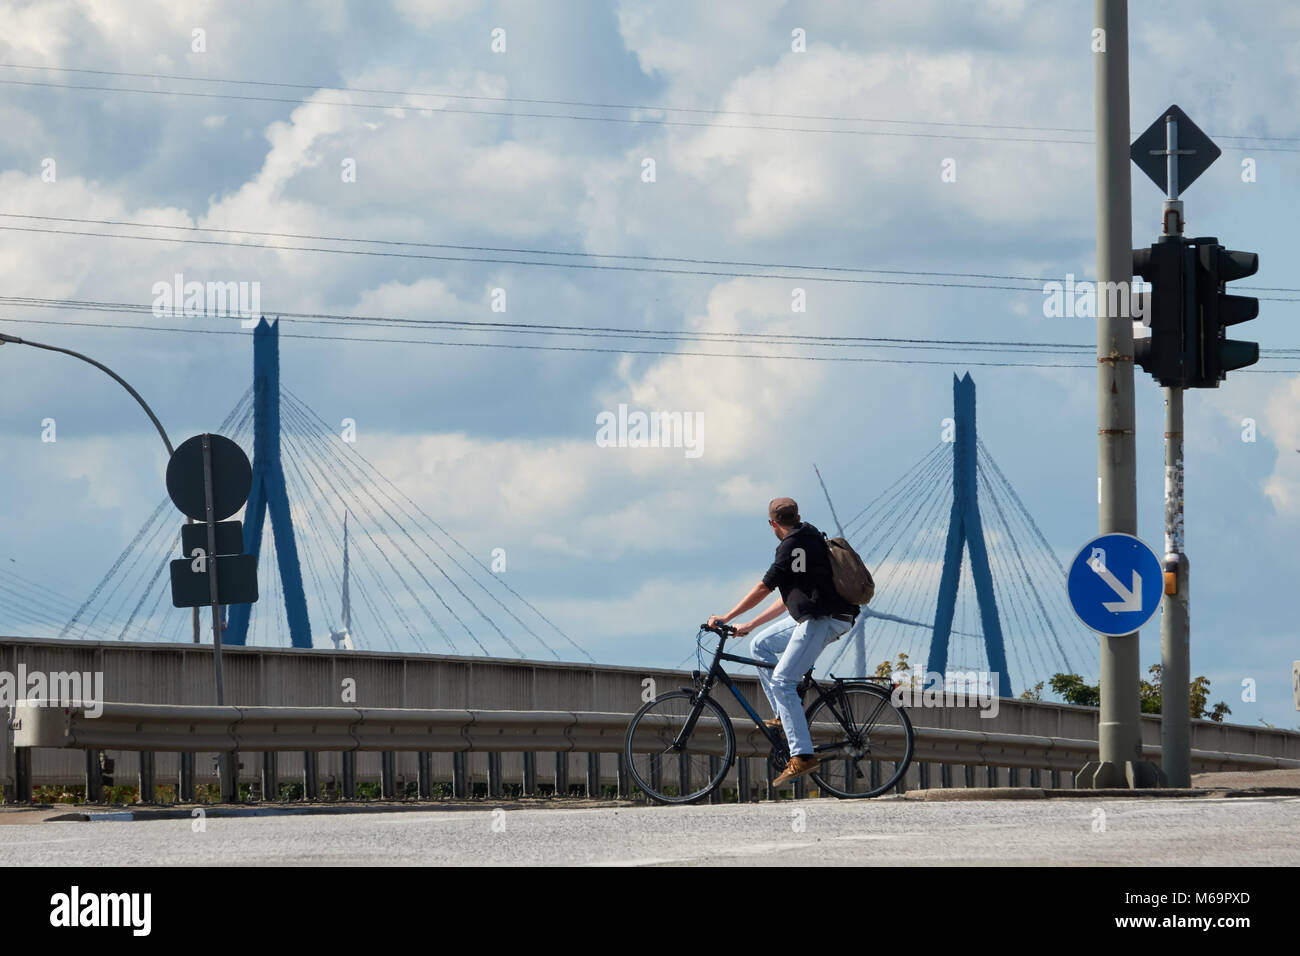 A guy in a shirt and blue jeans is riding a road bike to work on a summer sunny day. Stock Photo